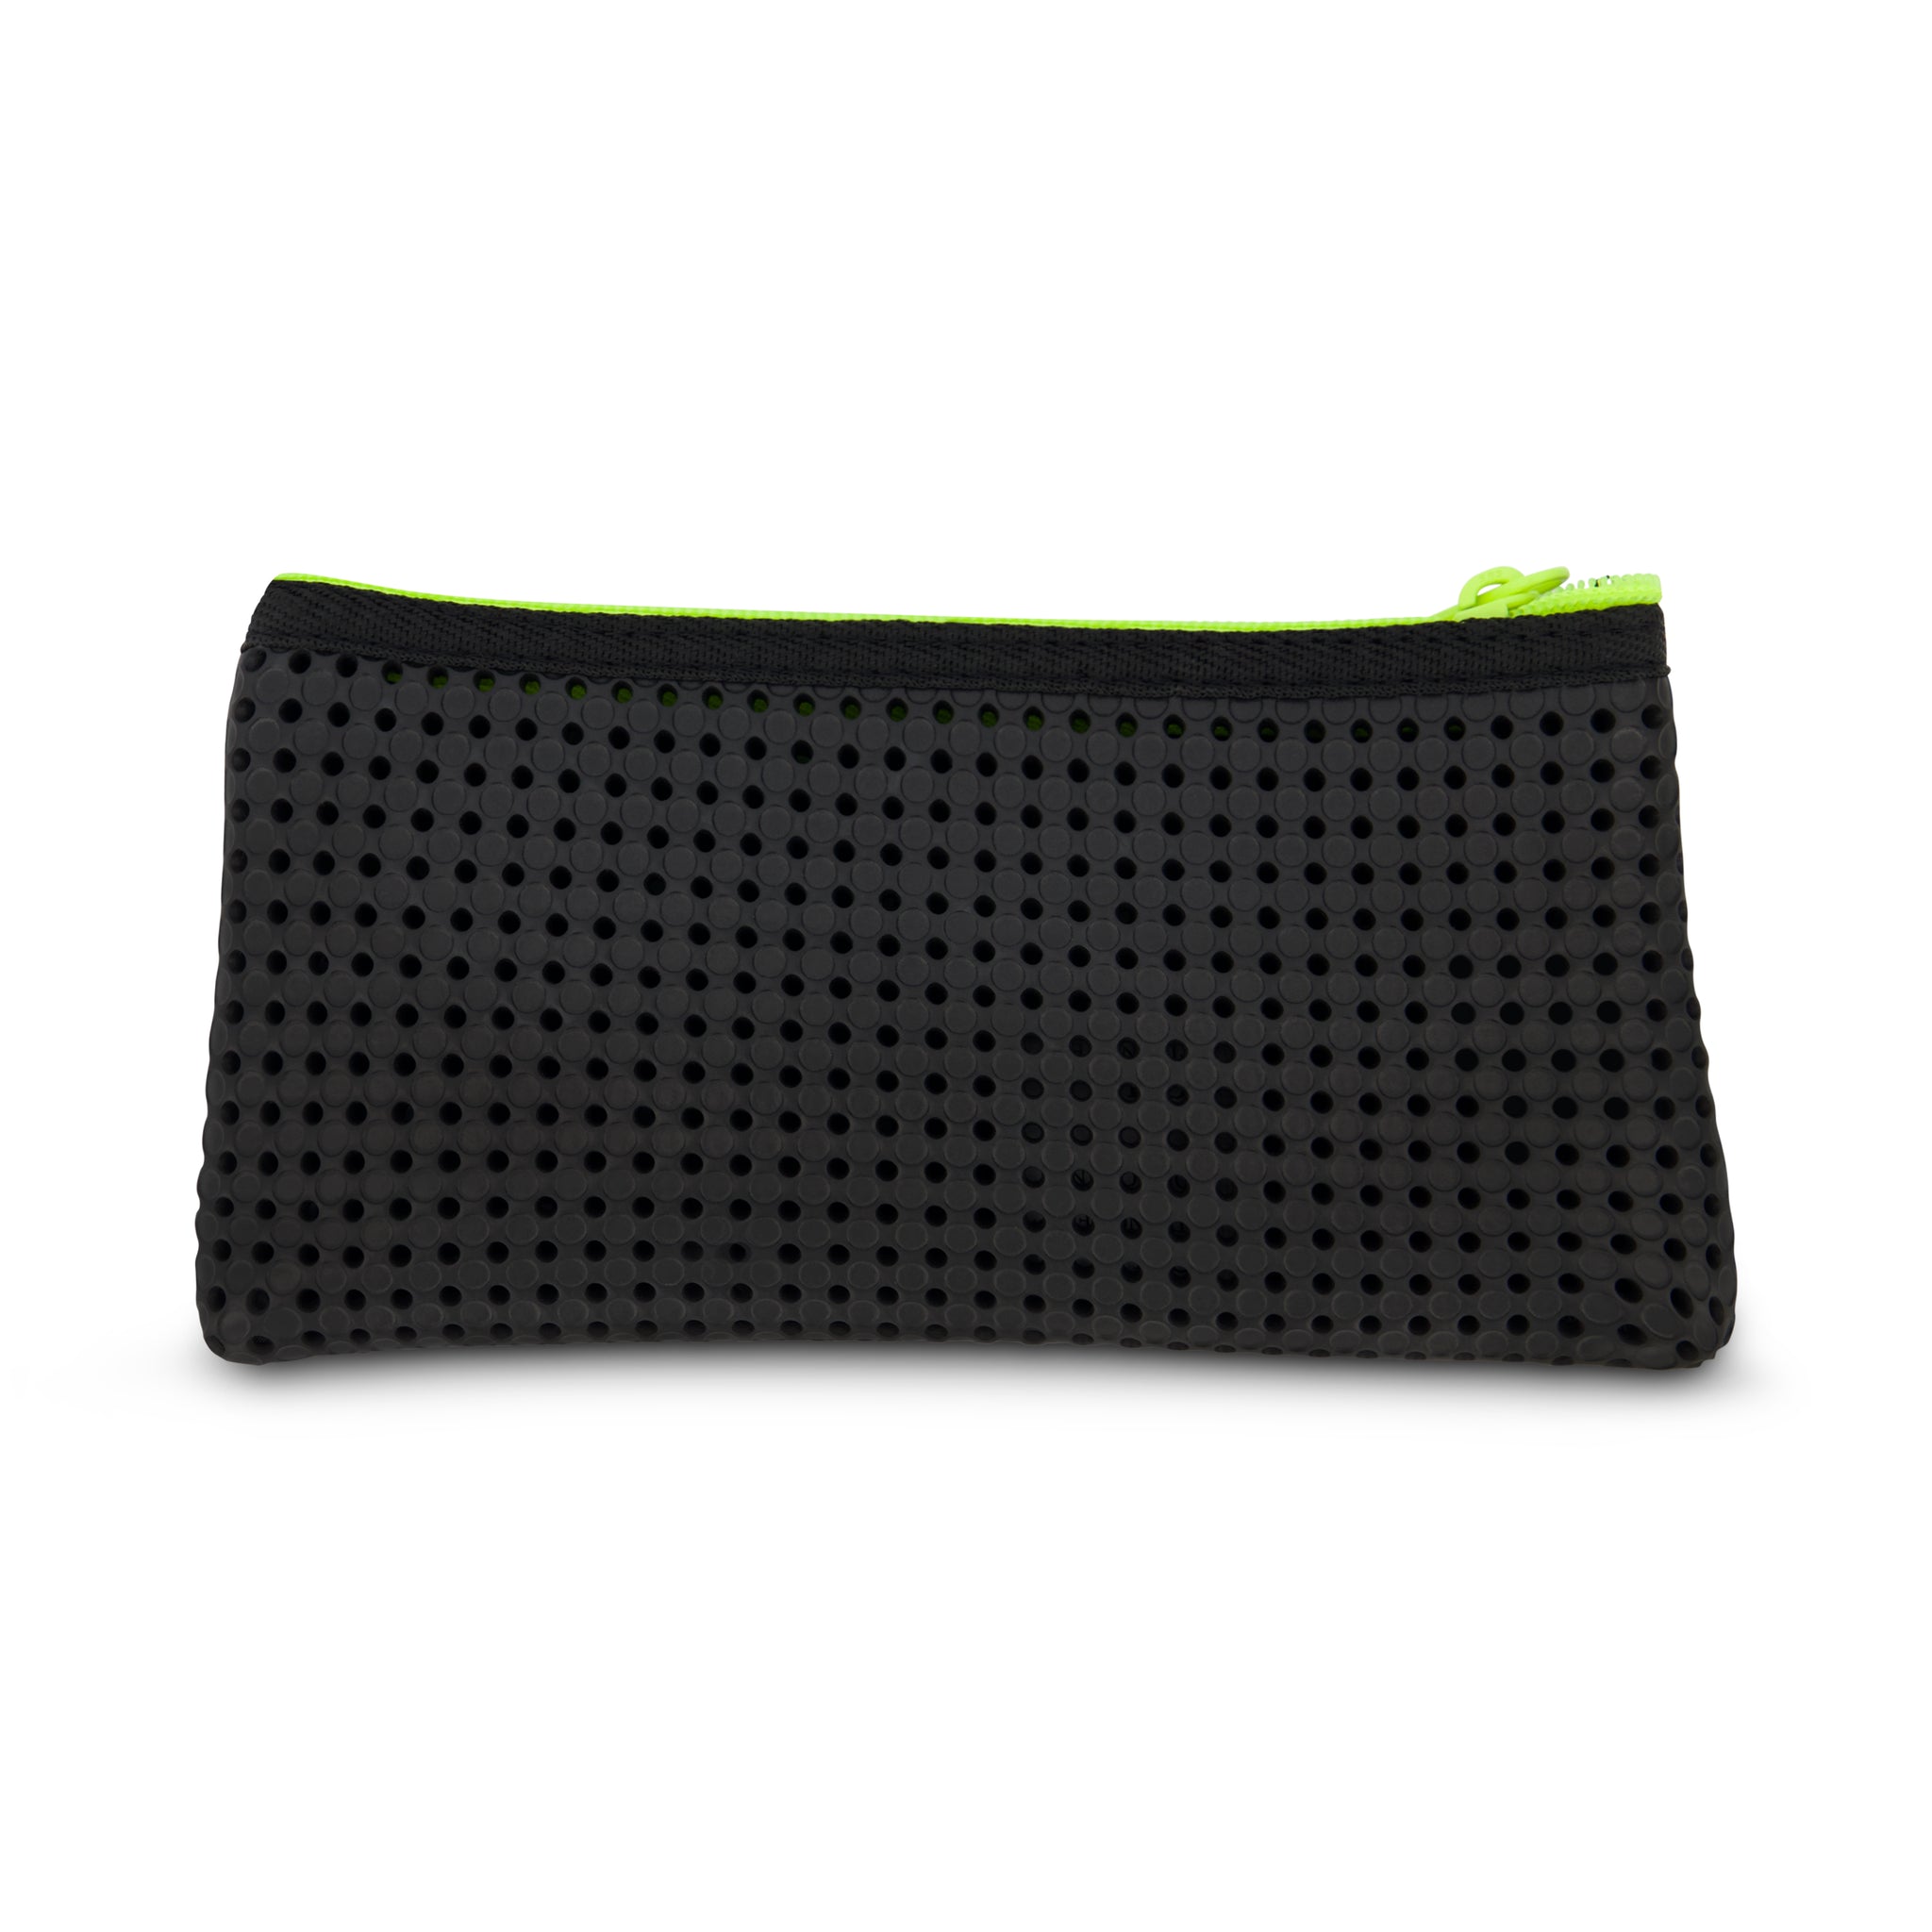 Flat Pencil Pouch Neon Lime